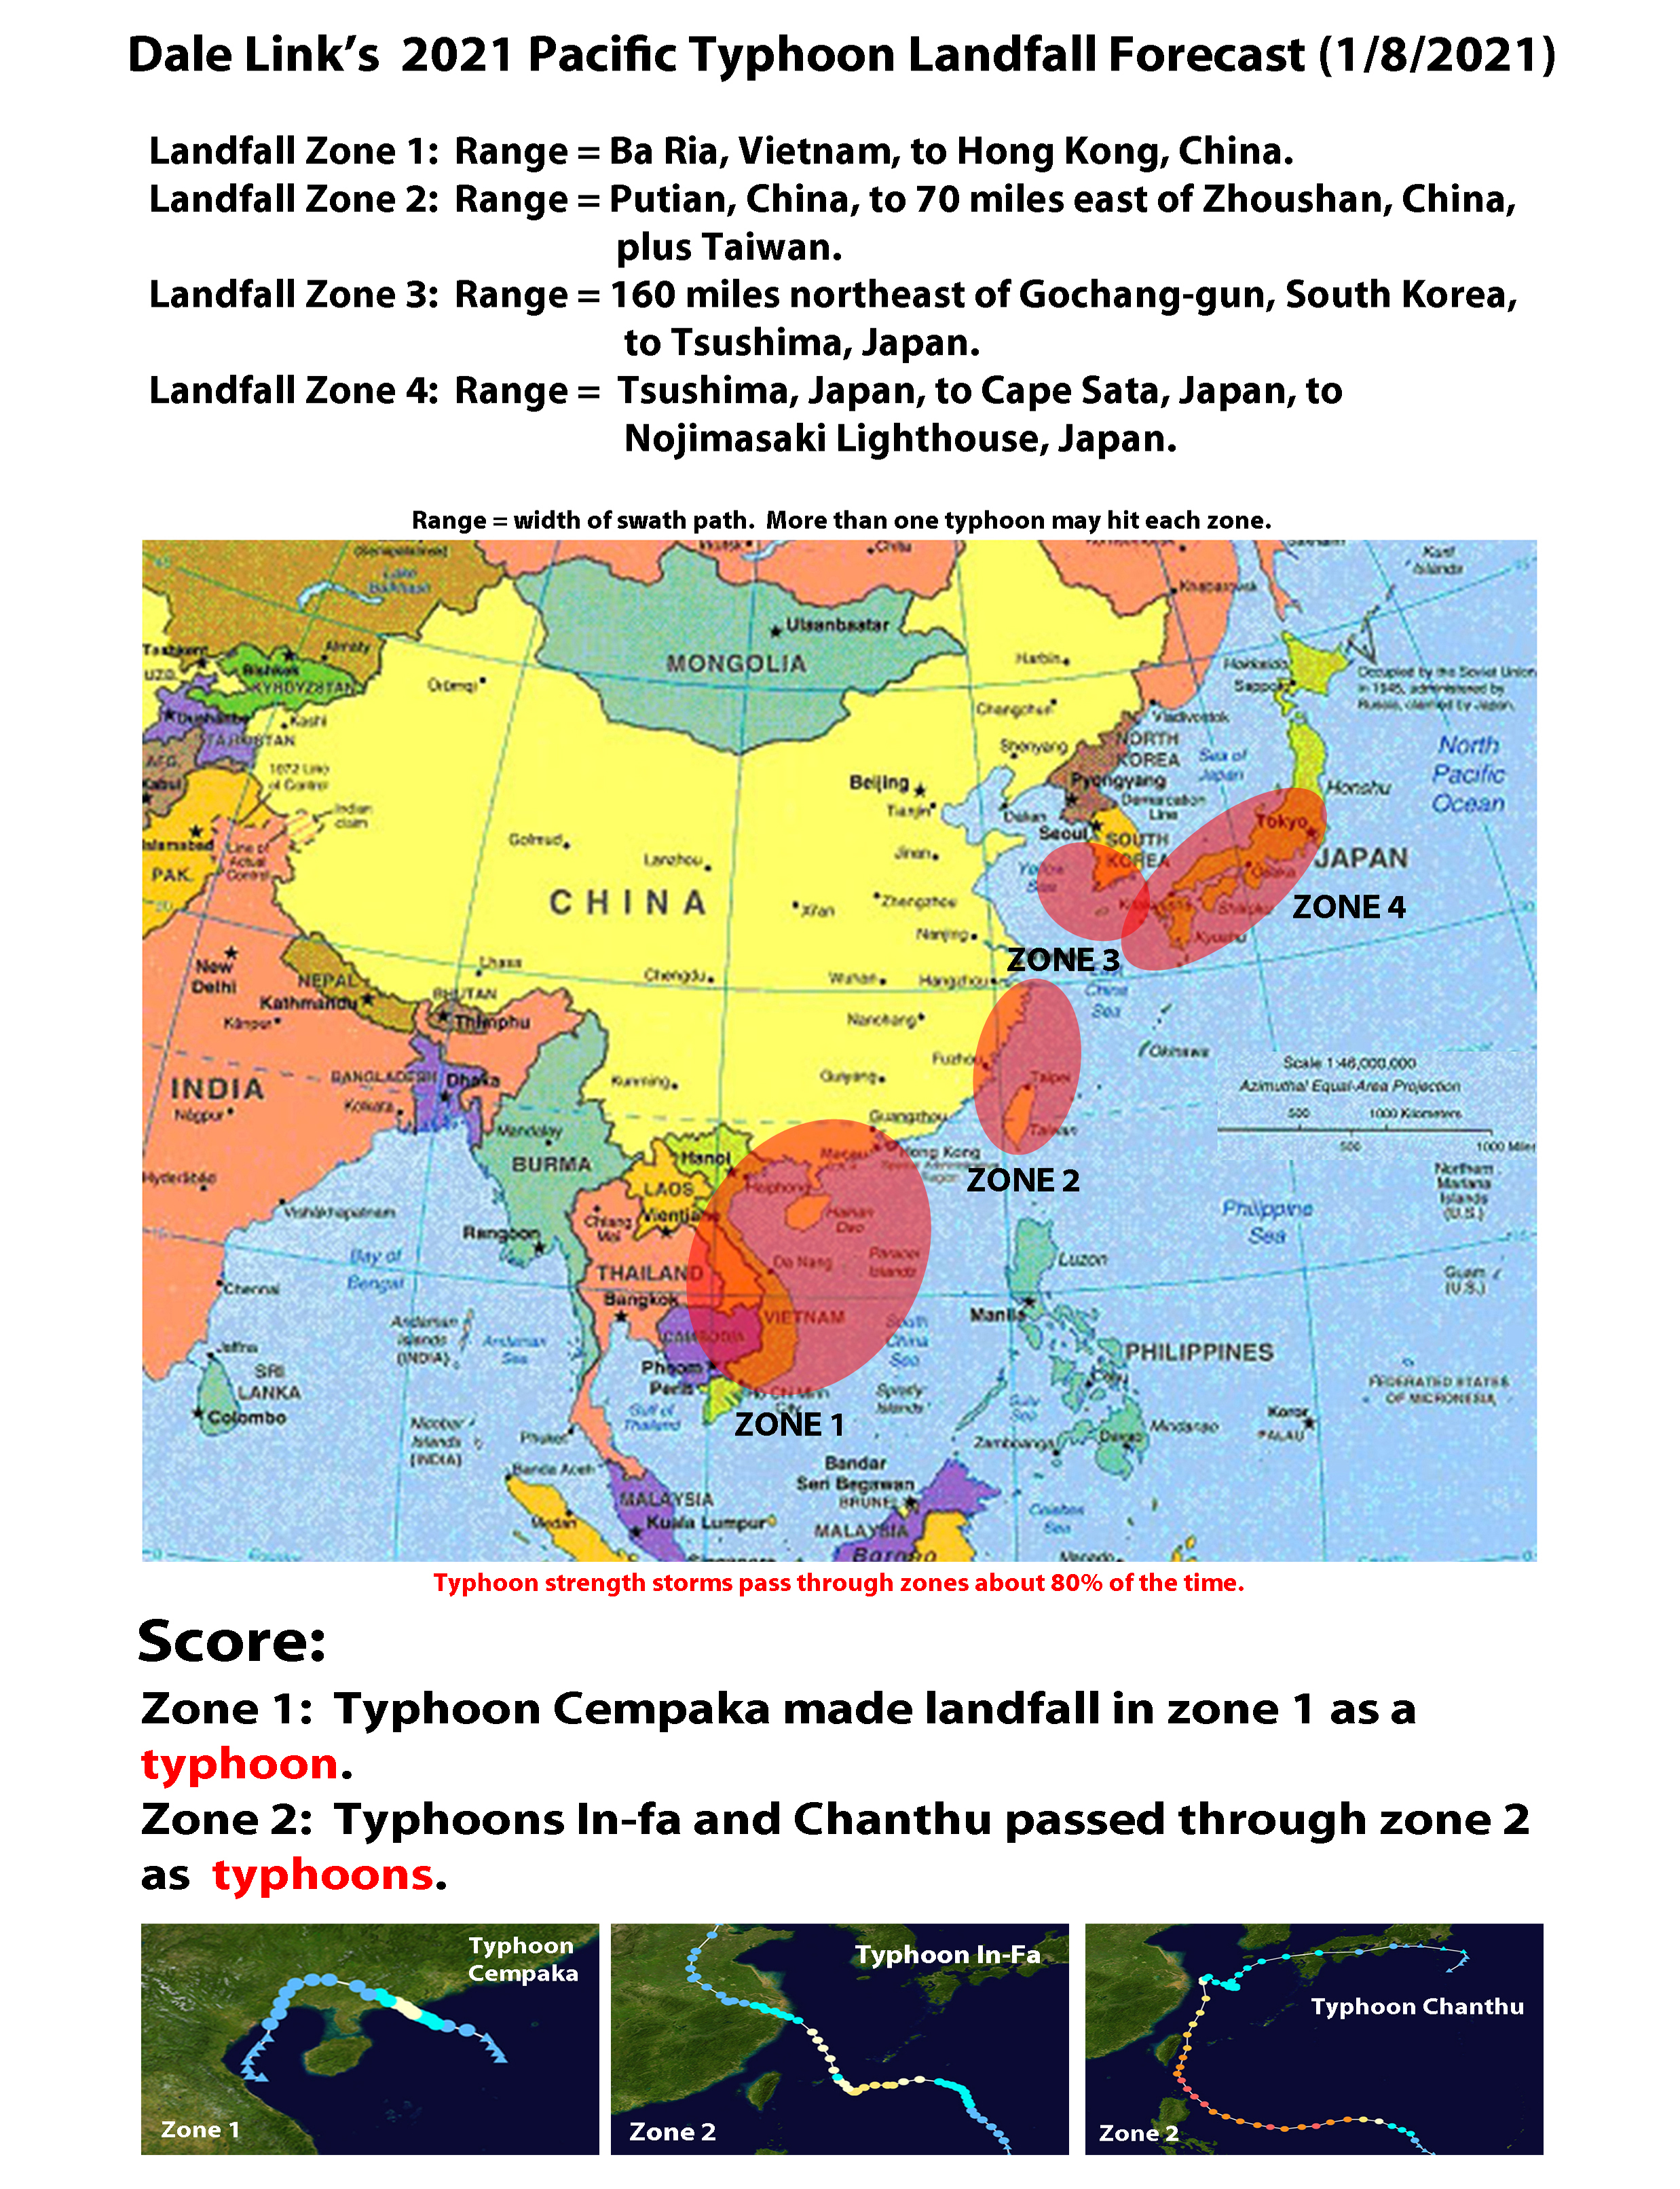 2021_pacific_typhoons_with_score